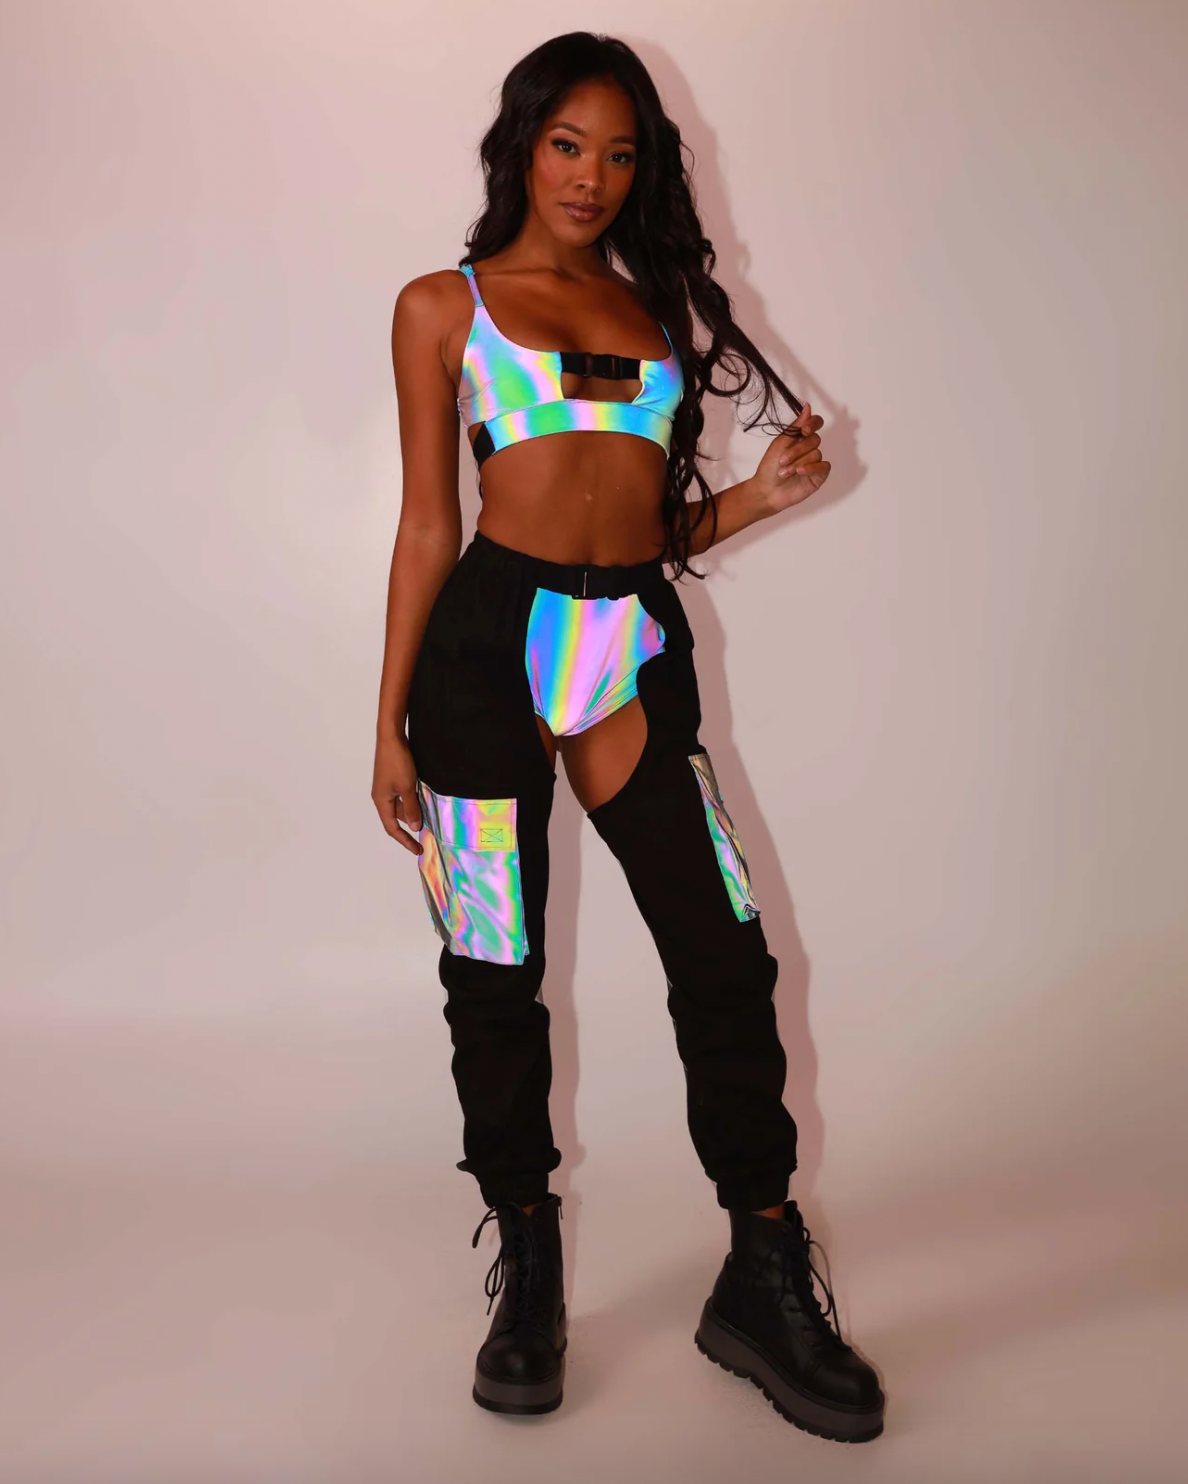 Princess Chain Crop Top, Rave Bra, Edc Outfit Burning Man Outfit -   Israel